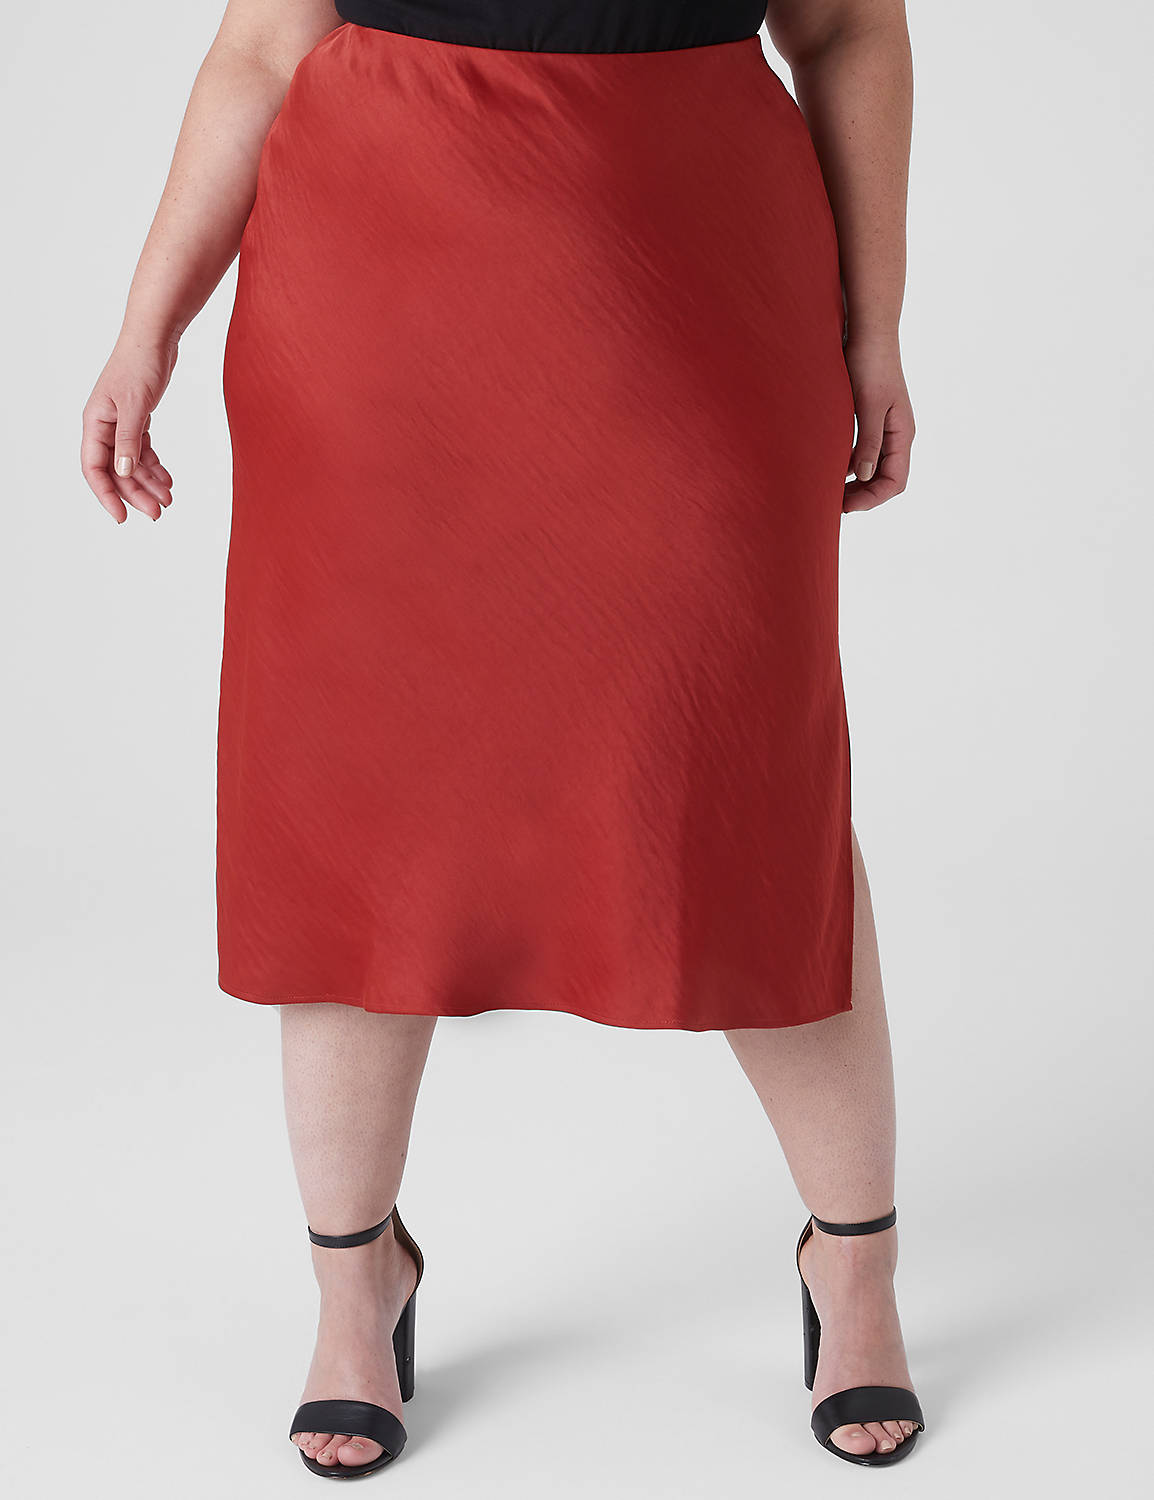 Bias-Cut Slip Satin Skirt with Side Product Image 1